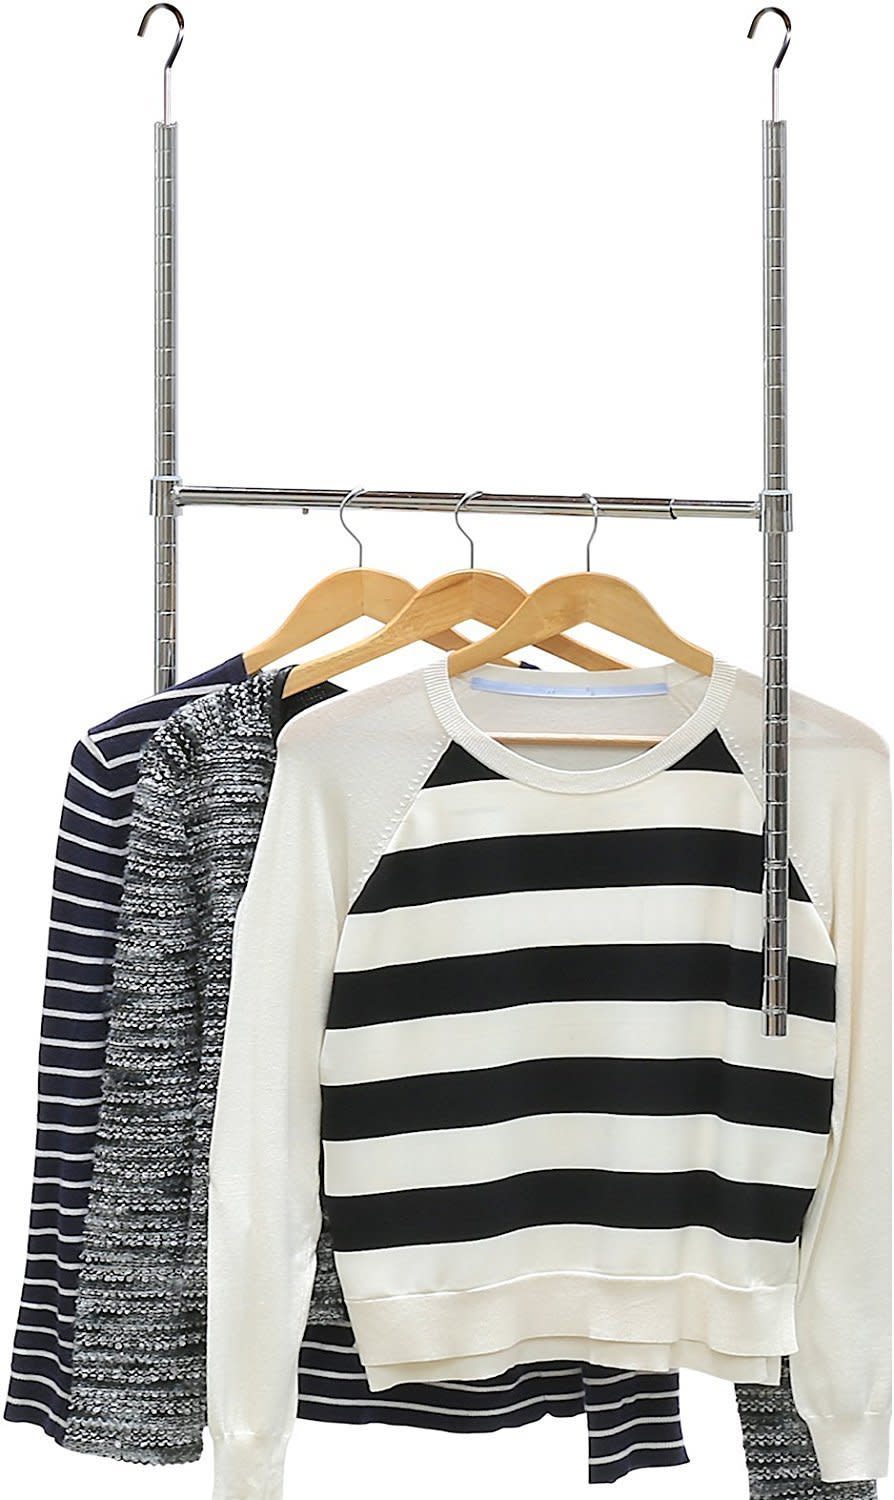 Run out of space to hang your clothes? Add another row of clothing with this minimalist closet rod. Get it on <a href="https://www.amazon.com/SimpleHouseware-Adjustable-Closet-Hanging-Chrome/dp/B01K07MY1K/ref=sr_1_3_sspa?s=home-garden&amp;ie=UTF8&amp;qid=1507052737&amp;sr=1-3-spons&amp;keywords=closet+organization&amp;psc=1" target="_blank">Amazon</a>.